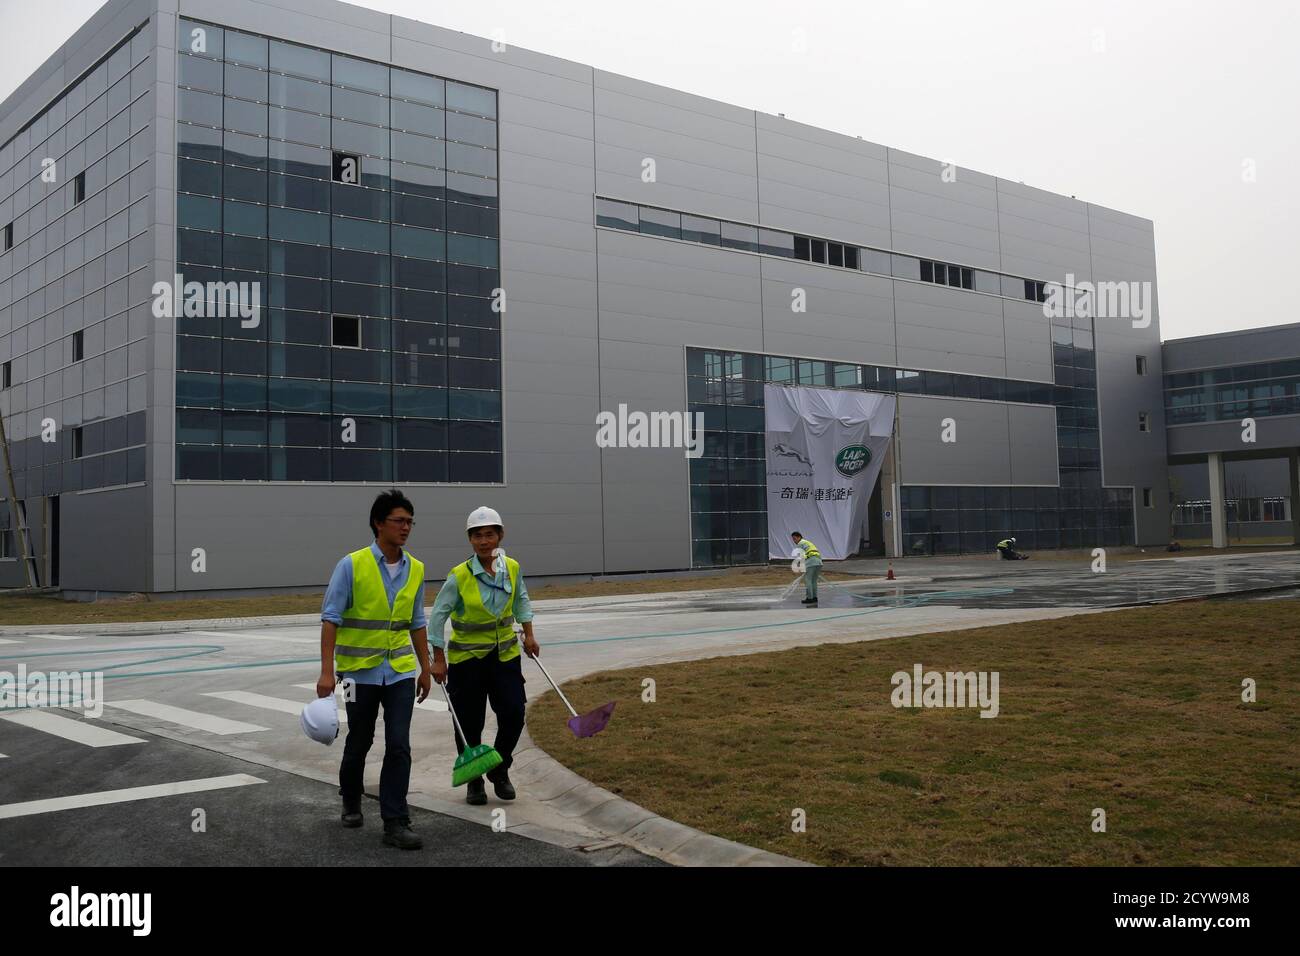 Employees walk on the campus of the new Chery Jaguar Land Rover plant in Changshu, Jiangsu province, October 21, 2014. British luxury carmaker Jaguar Land Rover Ltd, owned by Indian conglomerate Tata group, expects its China sales to grow 20 percent this year, Greater China head Bob Grace said on Tuesday.  REUTERS/Aly Song (CHINA - Tags: BUSINESS TRANSPORT) Stock Photo